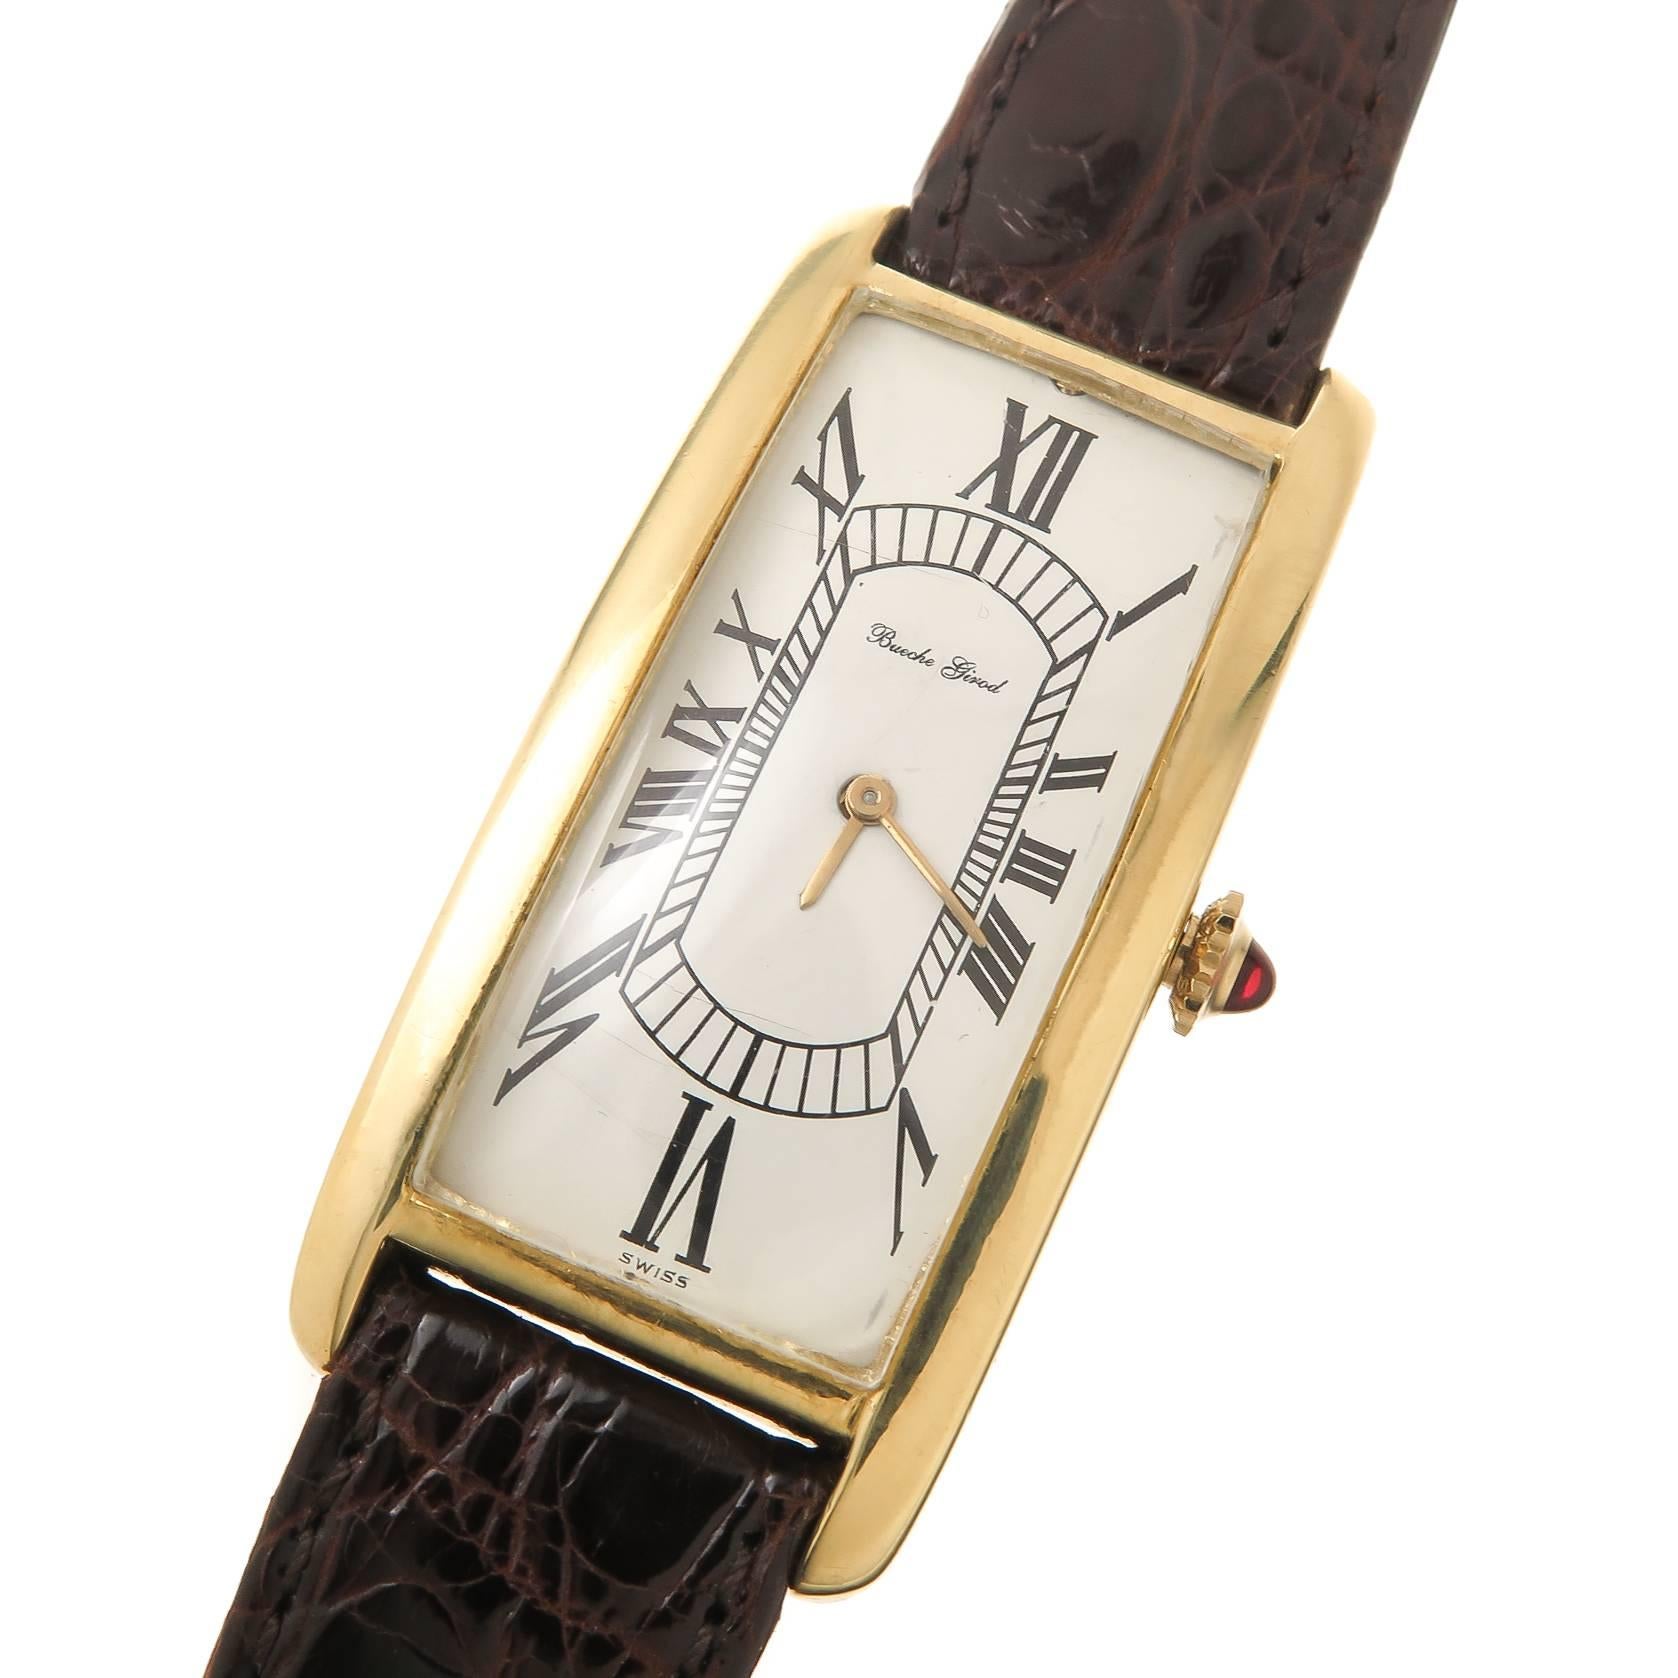 Circa 1970 bueche Girod 18K yellow Gold Wrist Watch, measuring 2 inch in Length and 7/8 inch wide with a significant wrist fitting curve. 17 jewel mechanical, manual wind Movement, White dial with Black roman numerals and   a Ruby set Crown. New